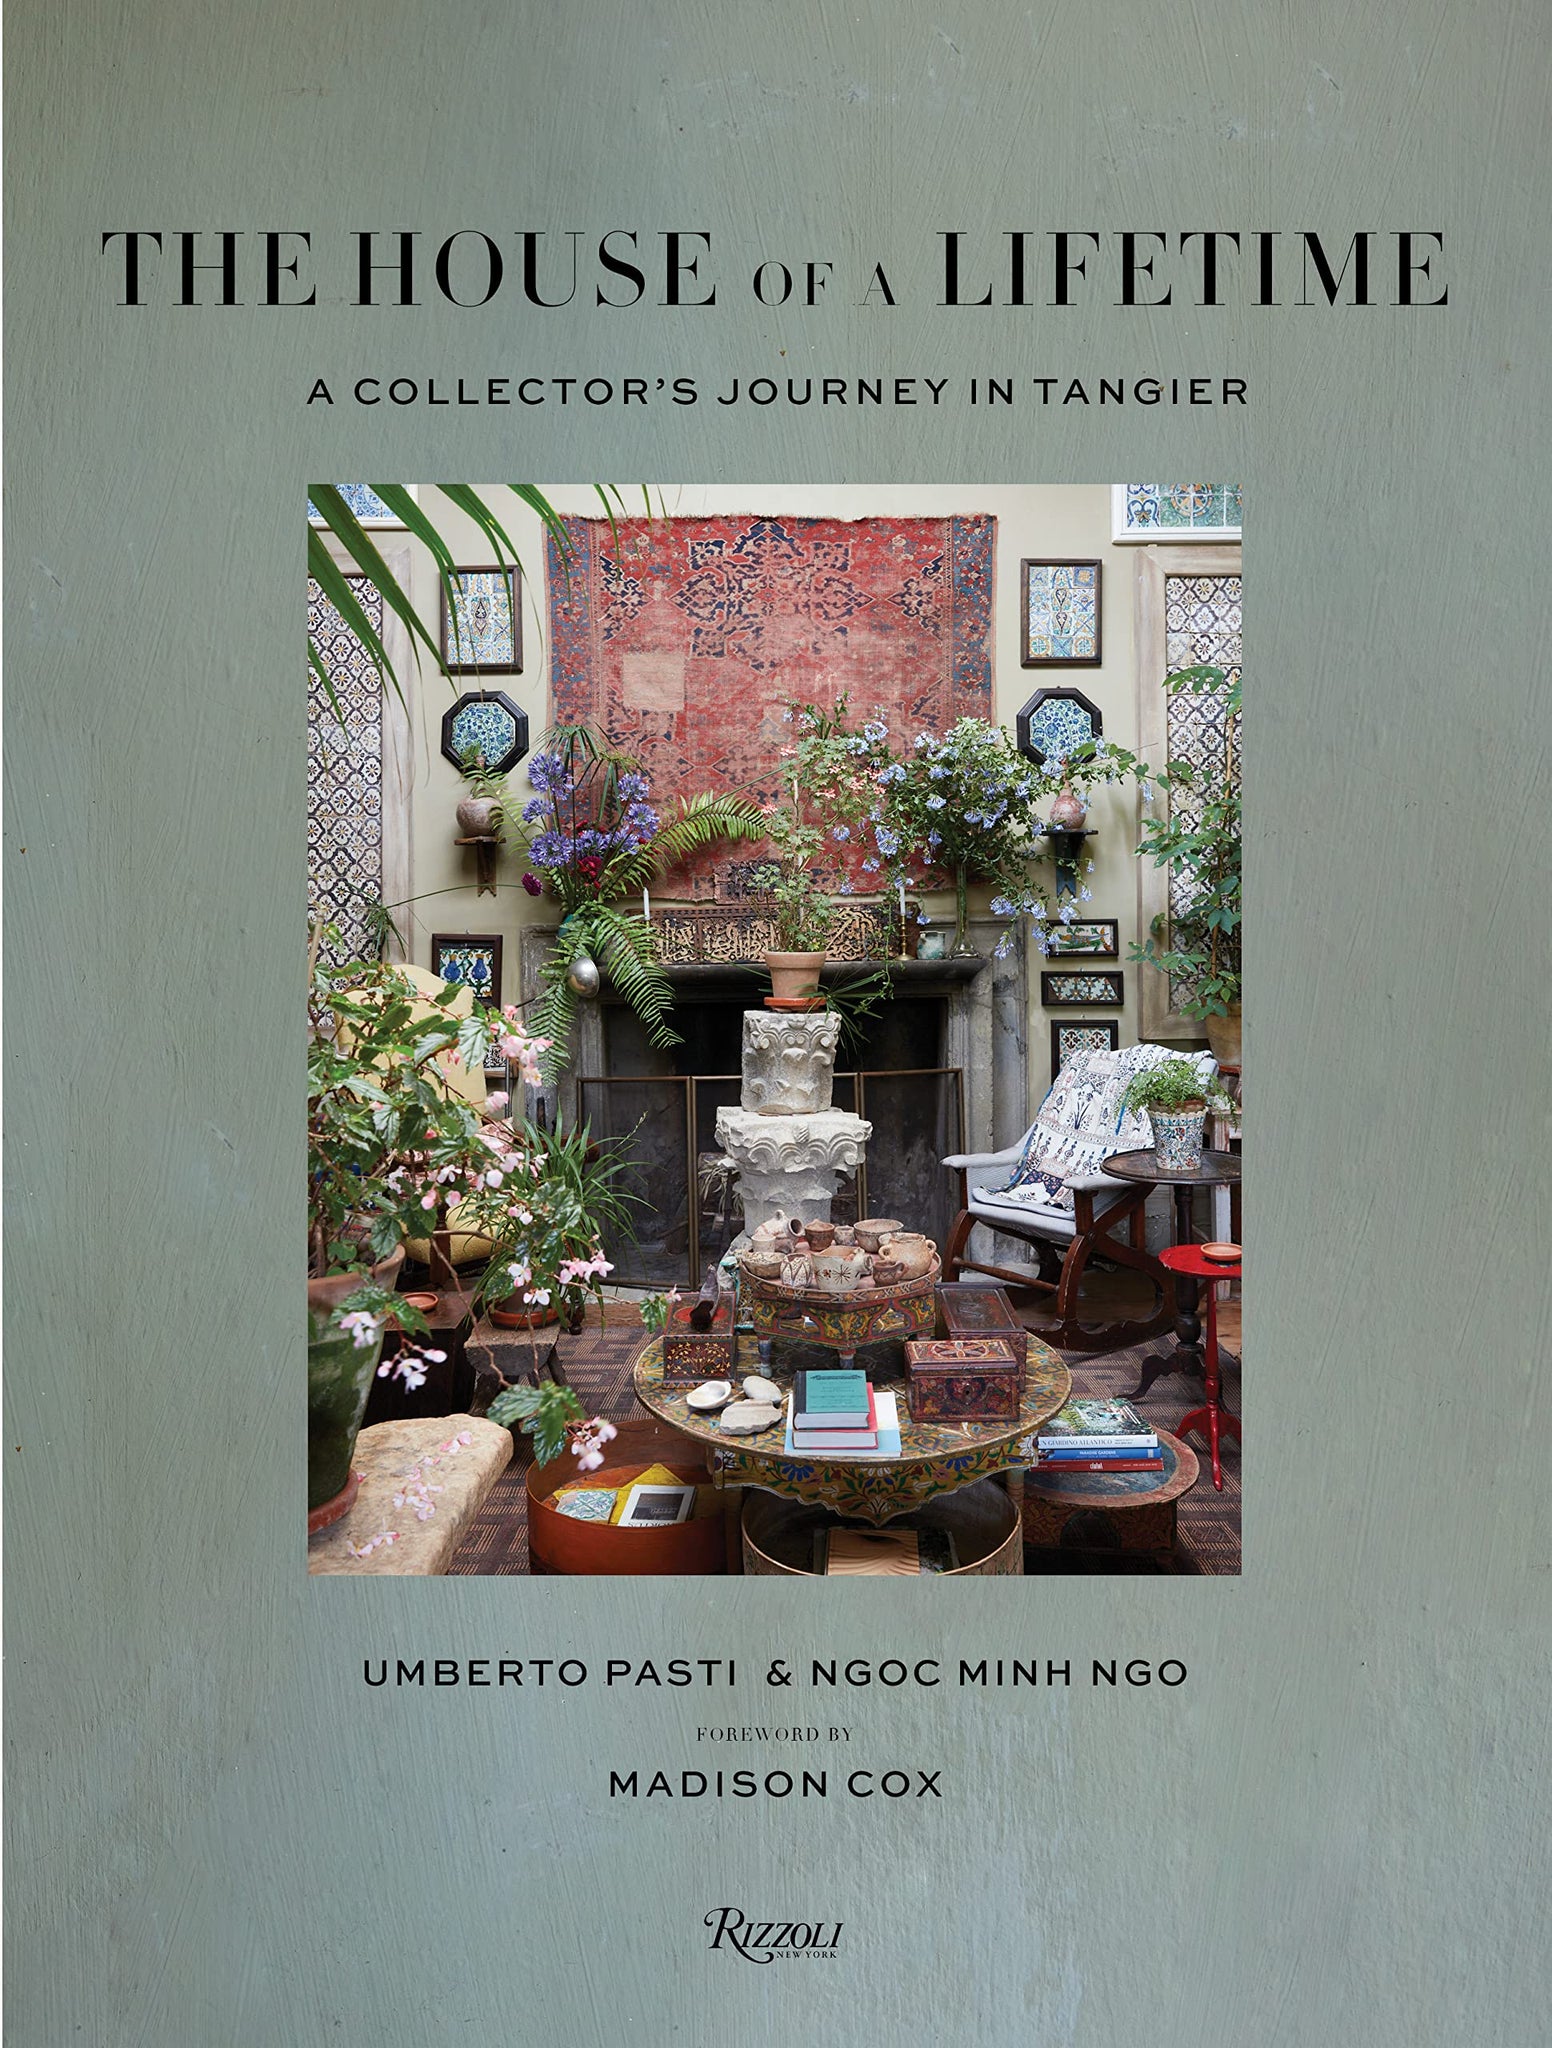 The House of a Lifetime: A Collector’s Journey in Tangier